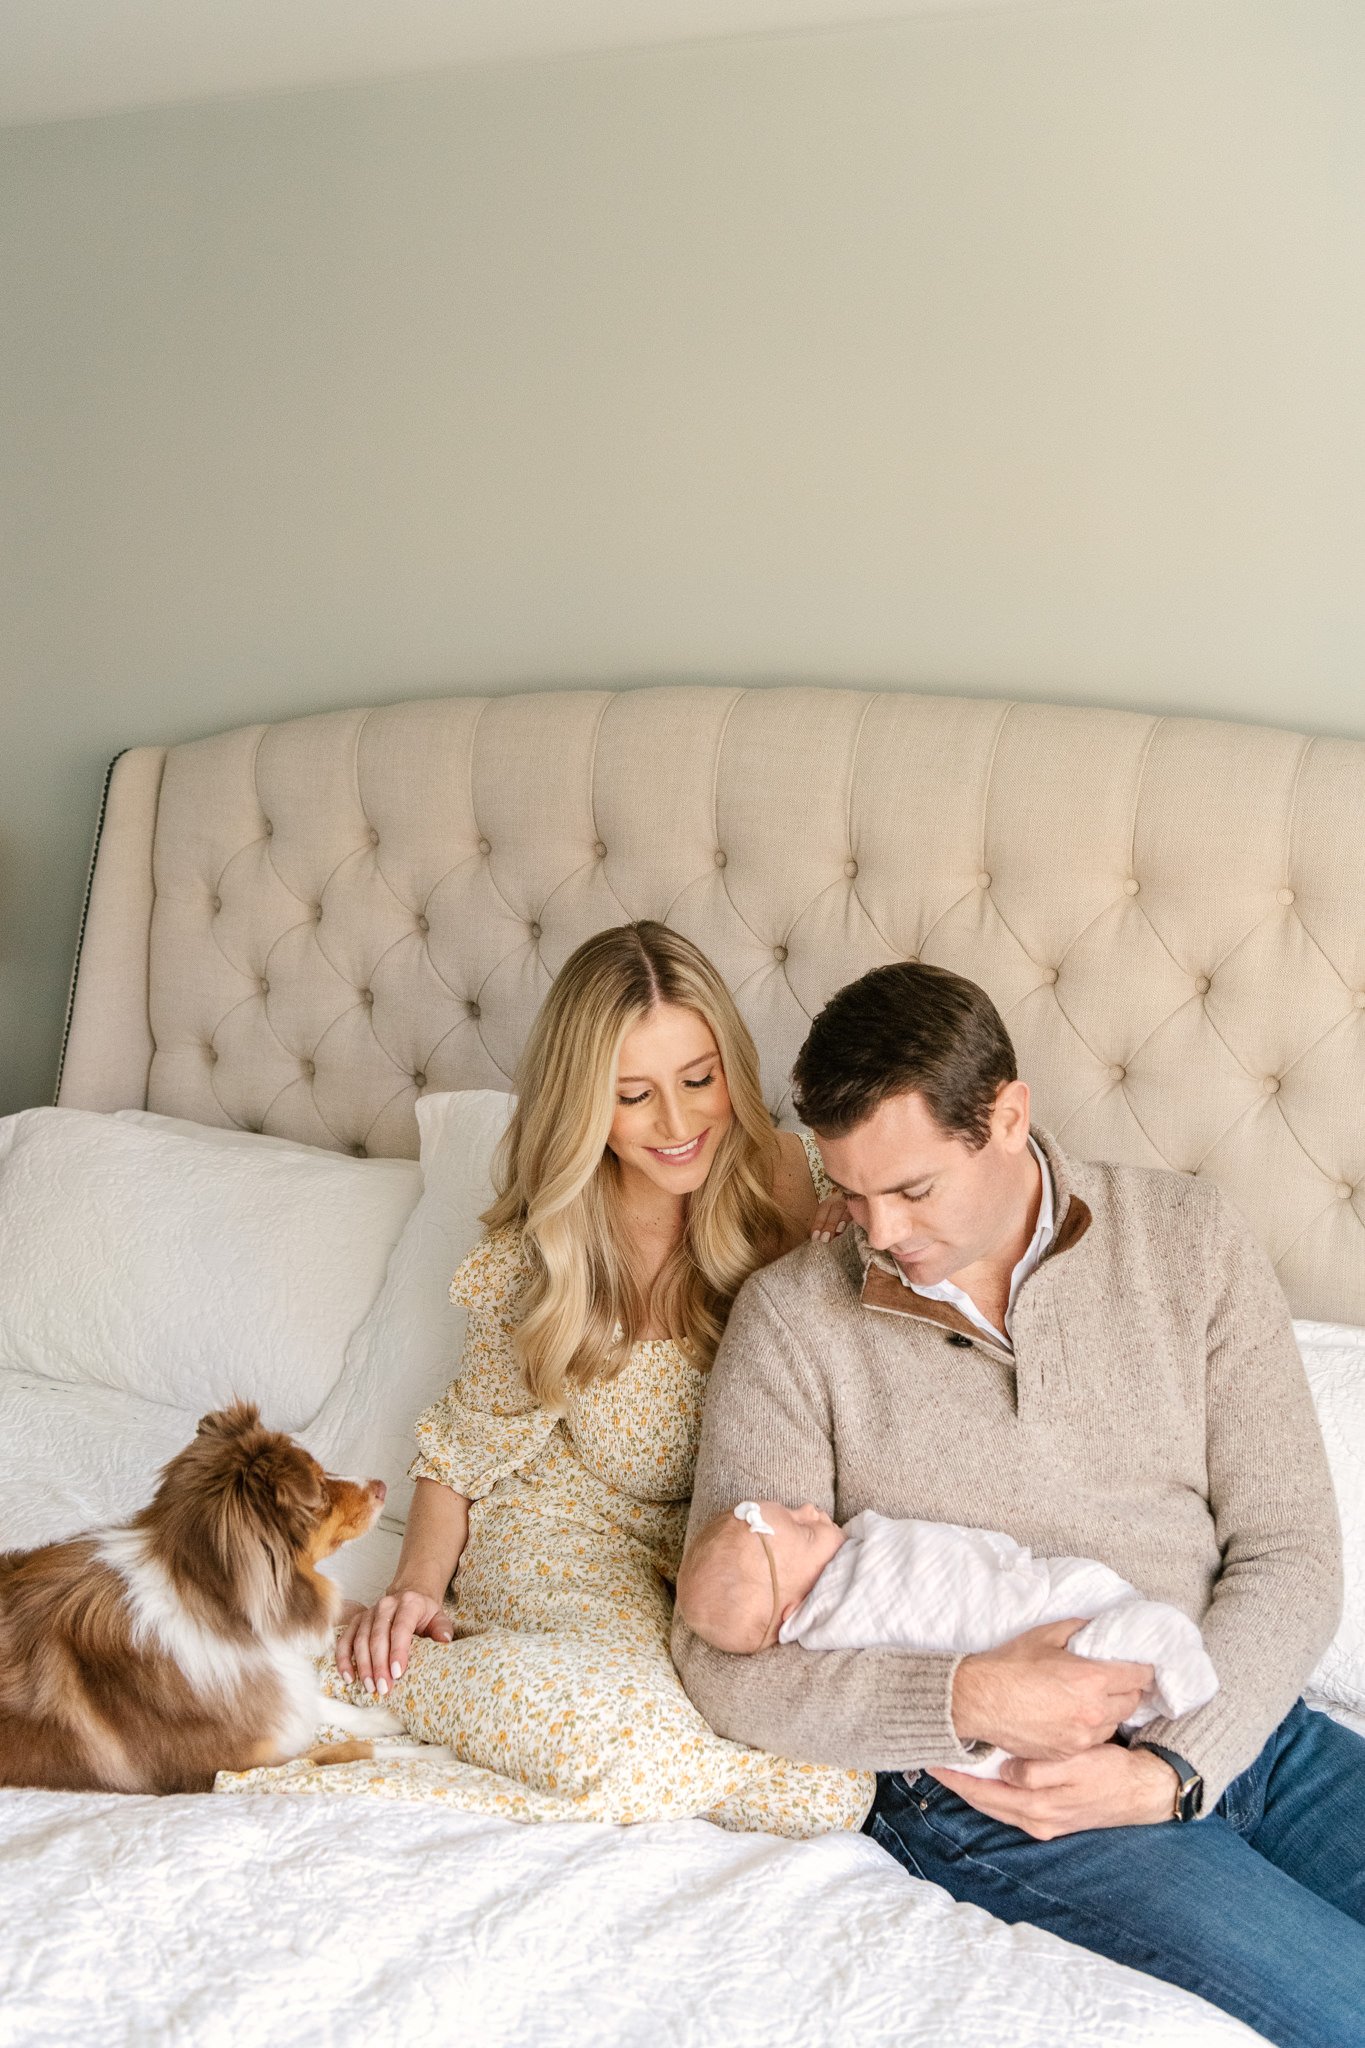  Portrait of a new family with a baby and dog sitting on the bed together by Nicole Hawkins Photography. family on bed #NicoleHawkinsPhotography #NicoleHawkinsNewborns #InHomeNewborns #NewJerseyNewborns #NewYorkNewborns #babygirlnewborns 